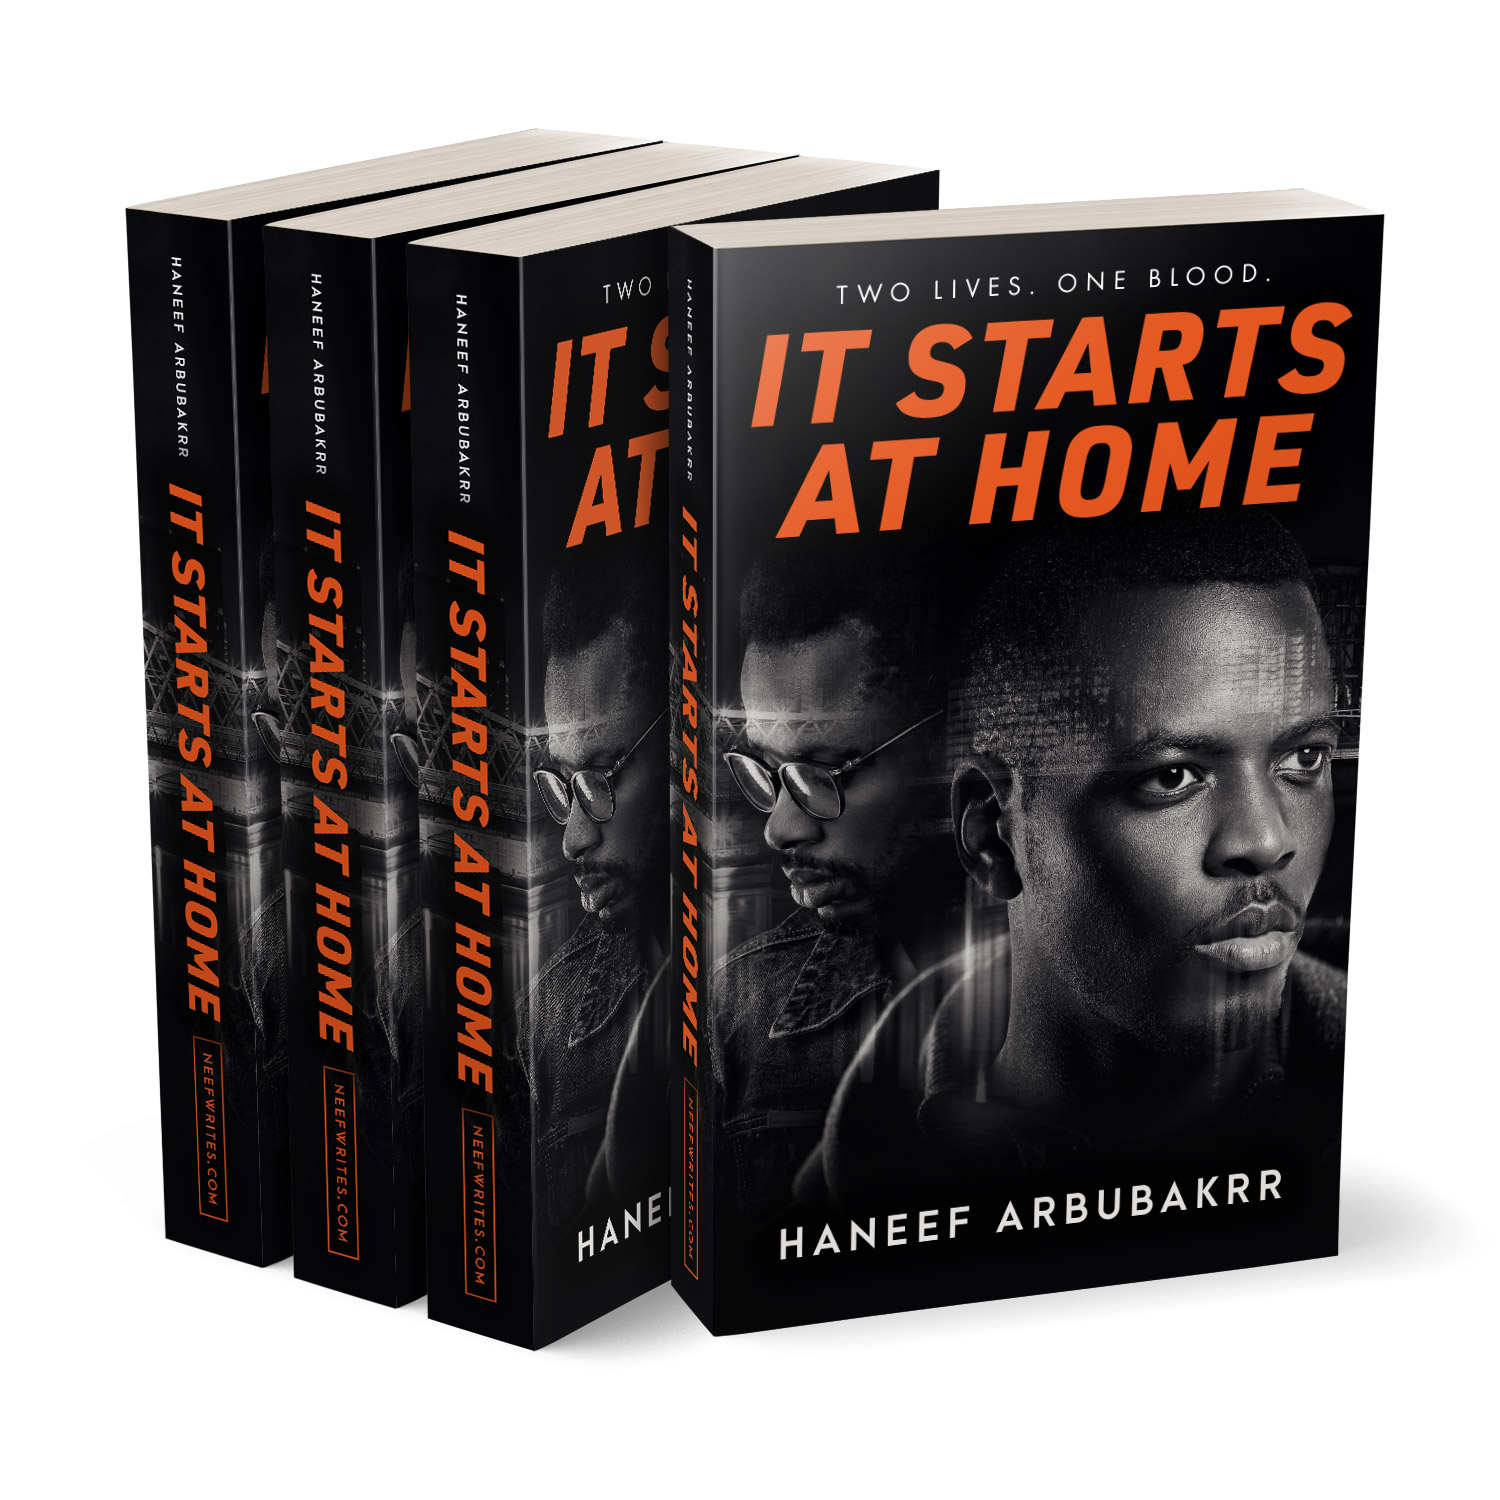 'It Starts At Home' is a gritty urban crime drama. The author is Haneef Arbubakrr. The book cover design and interior formatting are by Mark Thomas. To learn more about what Mark could do for your book, please visit coverness.com.